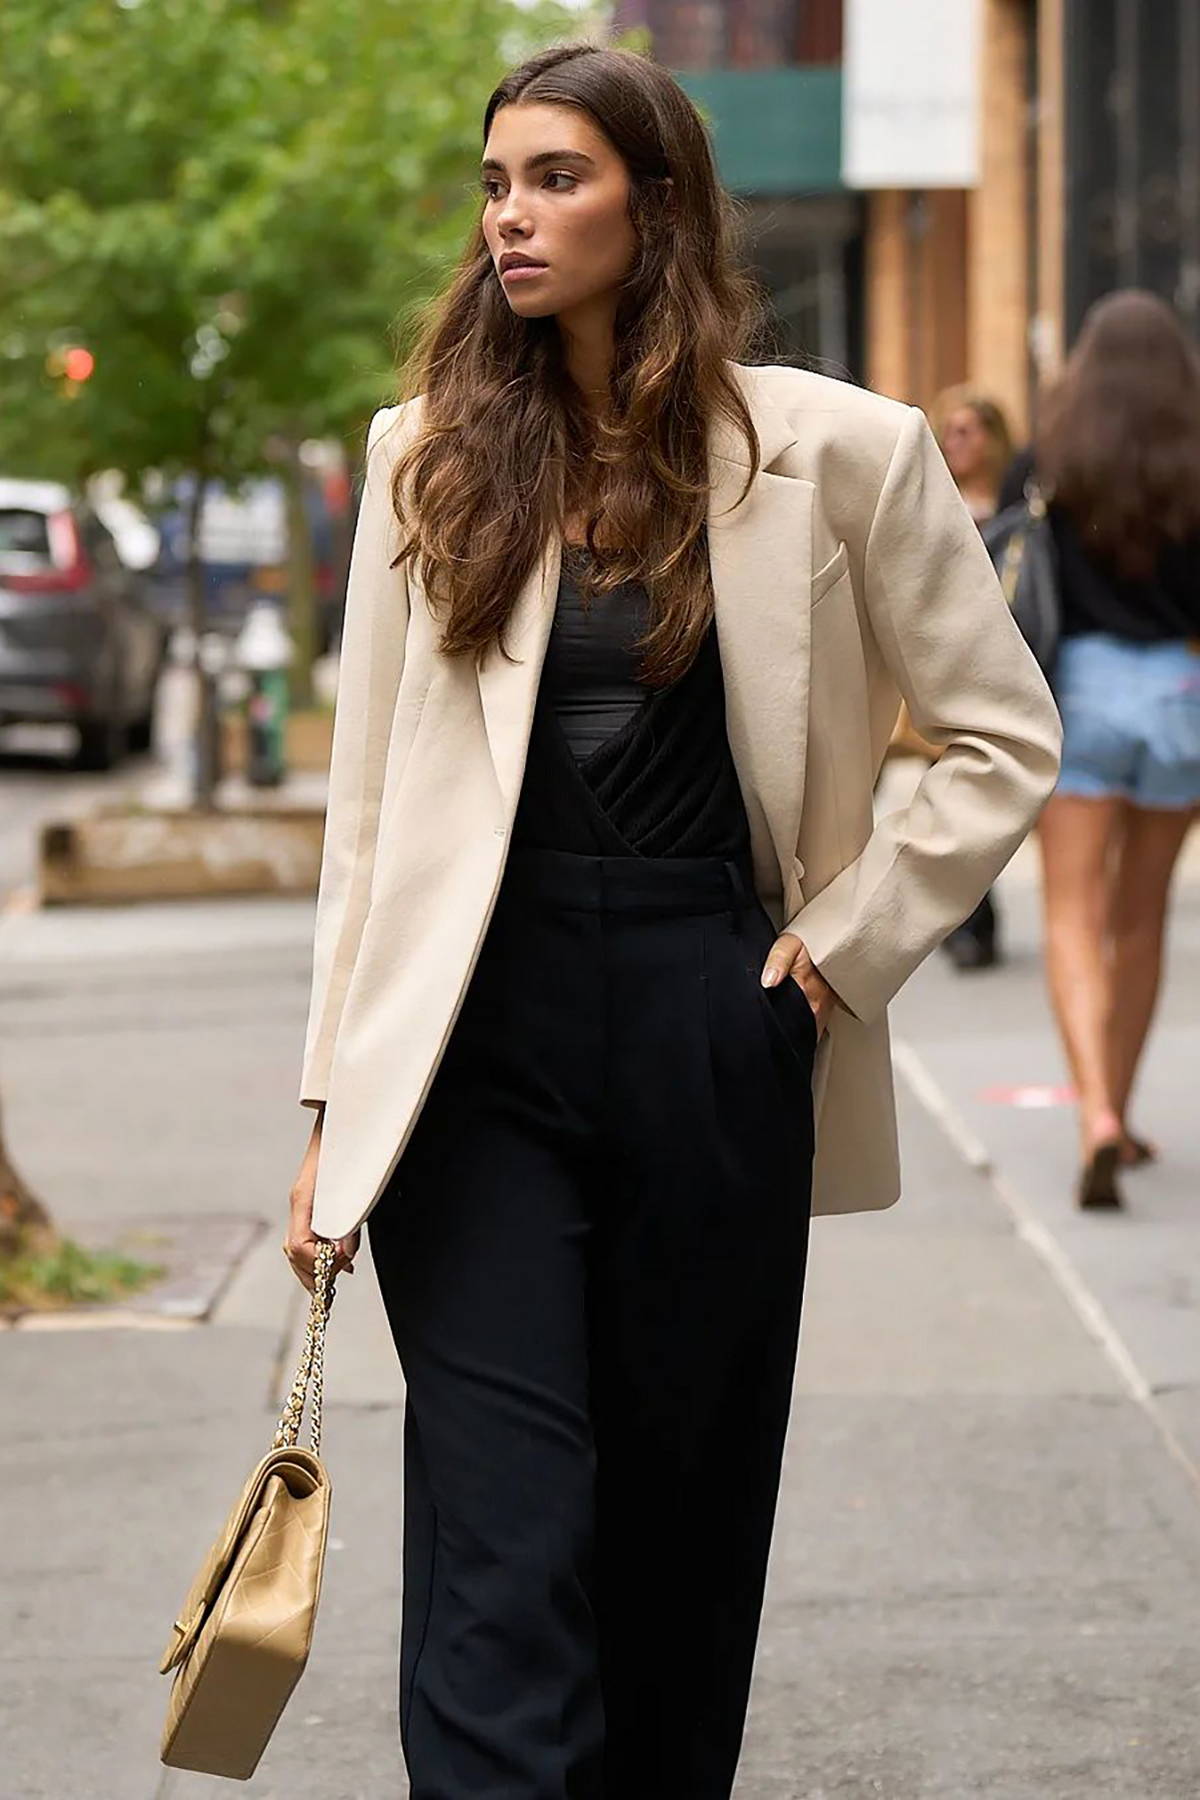 Turtleneck With A Blazer: How To Get The Look Right (16 Outfits)